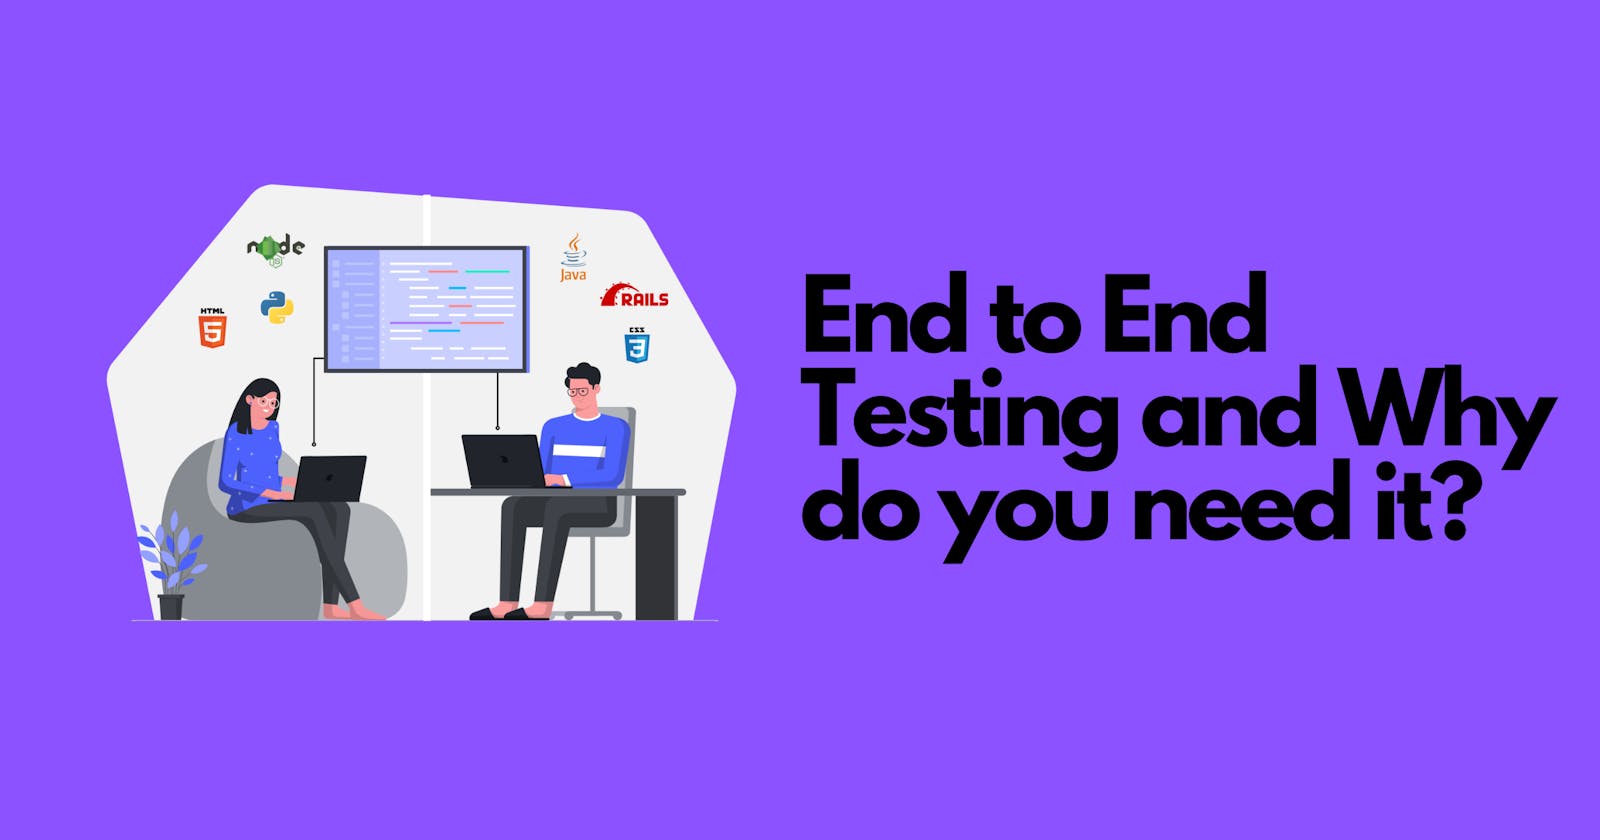 What is End to End Testing and Why do you need it?